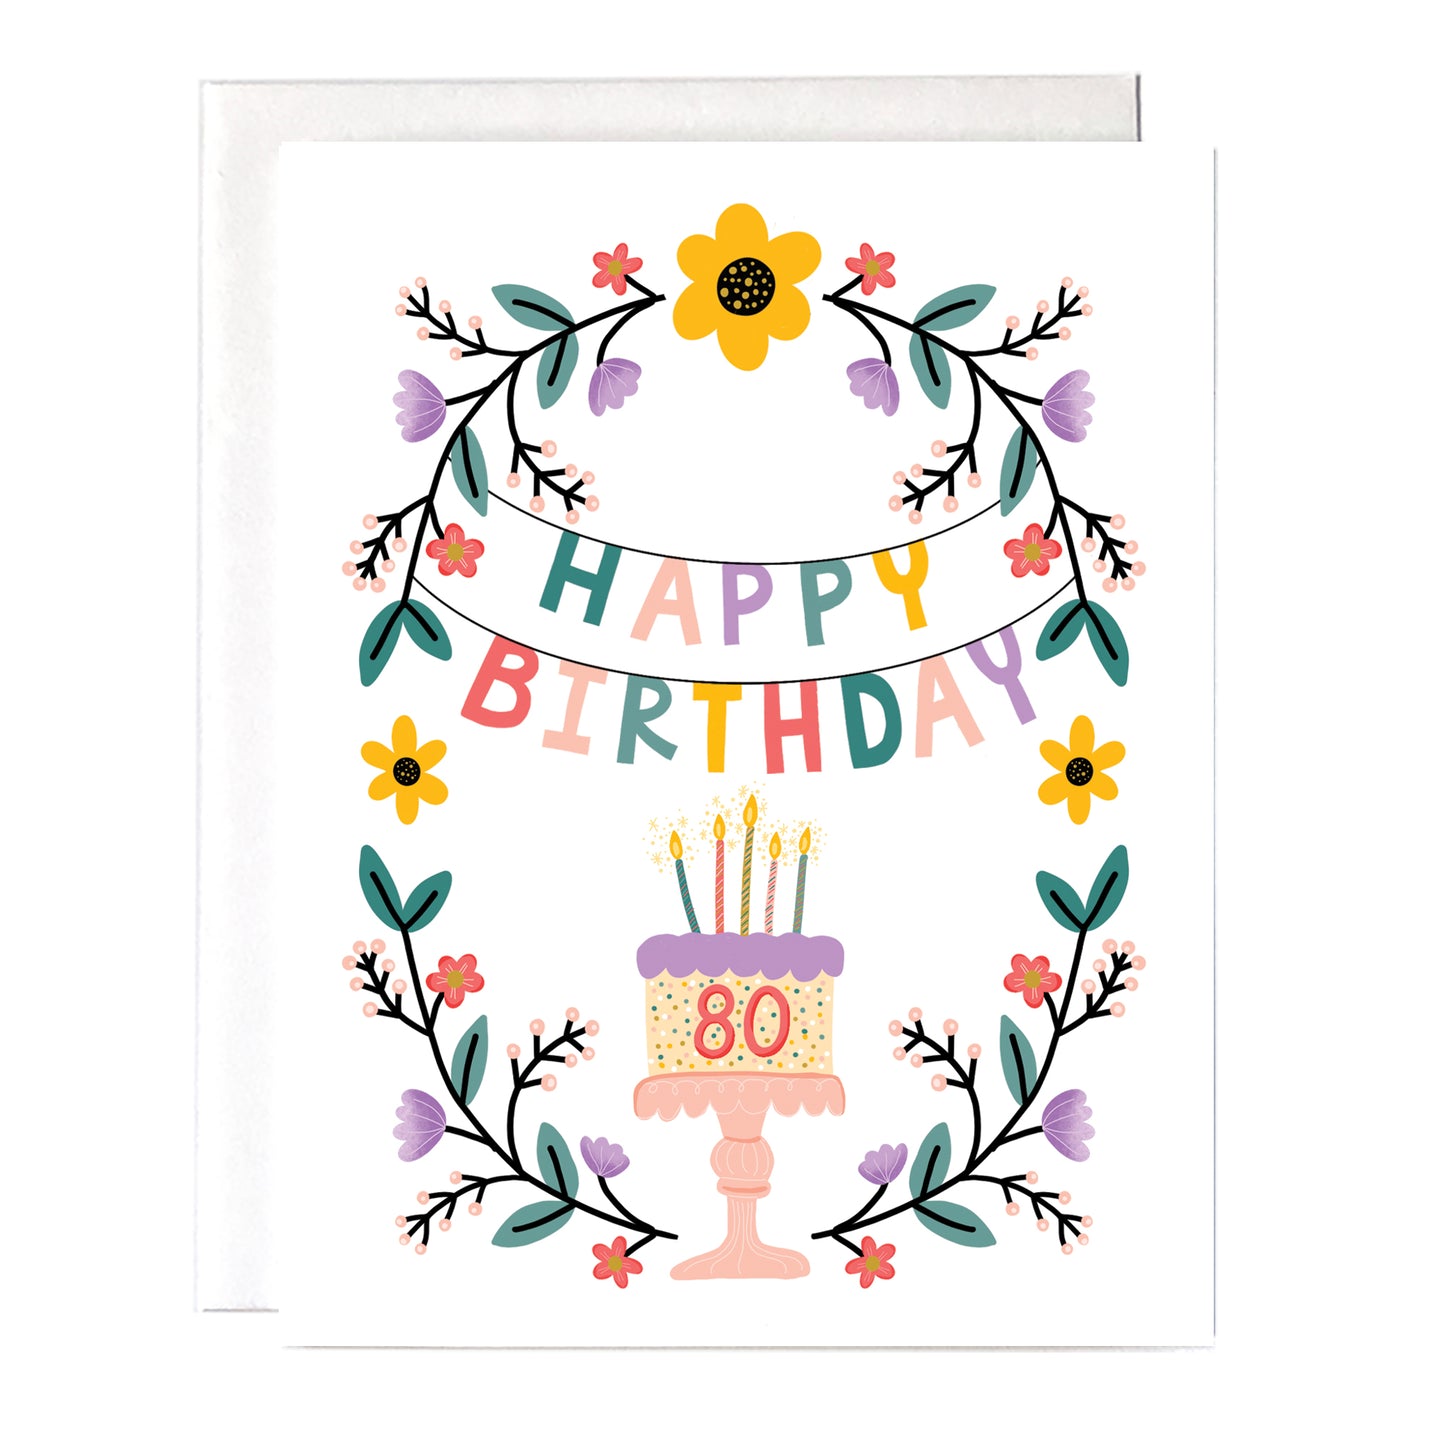 80th Birthday Card with beautiful floral design and birthday cake. Size A2 greeting card (4.25" x 5.5") with envelope, blank Inside. All cards are designed and Illustrated with love by me, Anna Fox, and are printed at my friendly neighborhood print shop in Denver, CO.